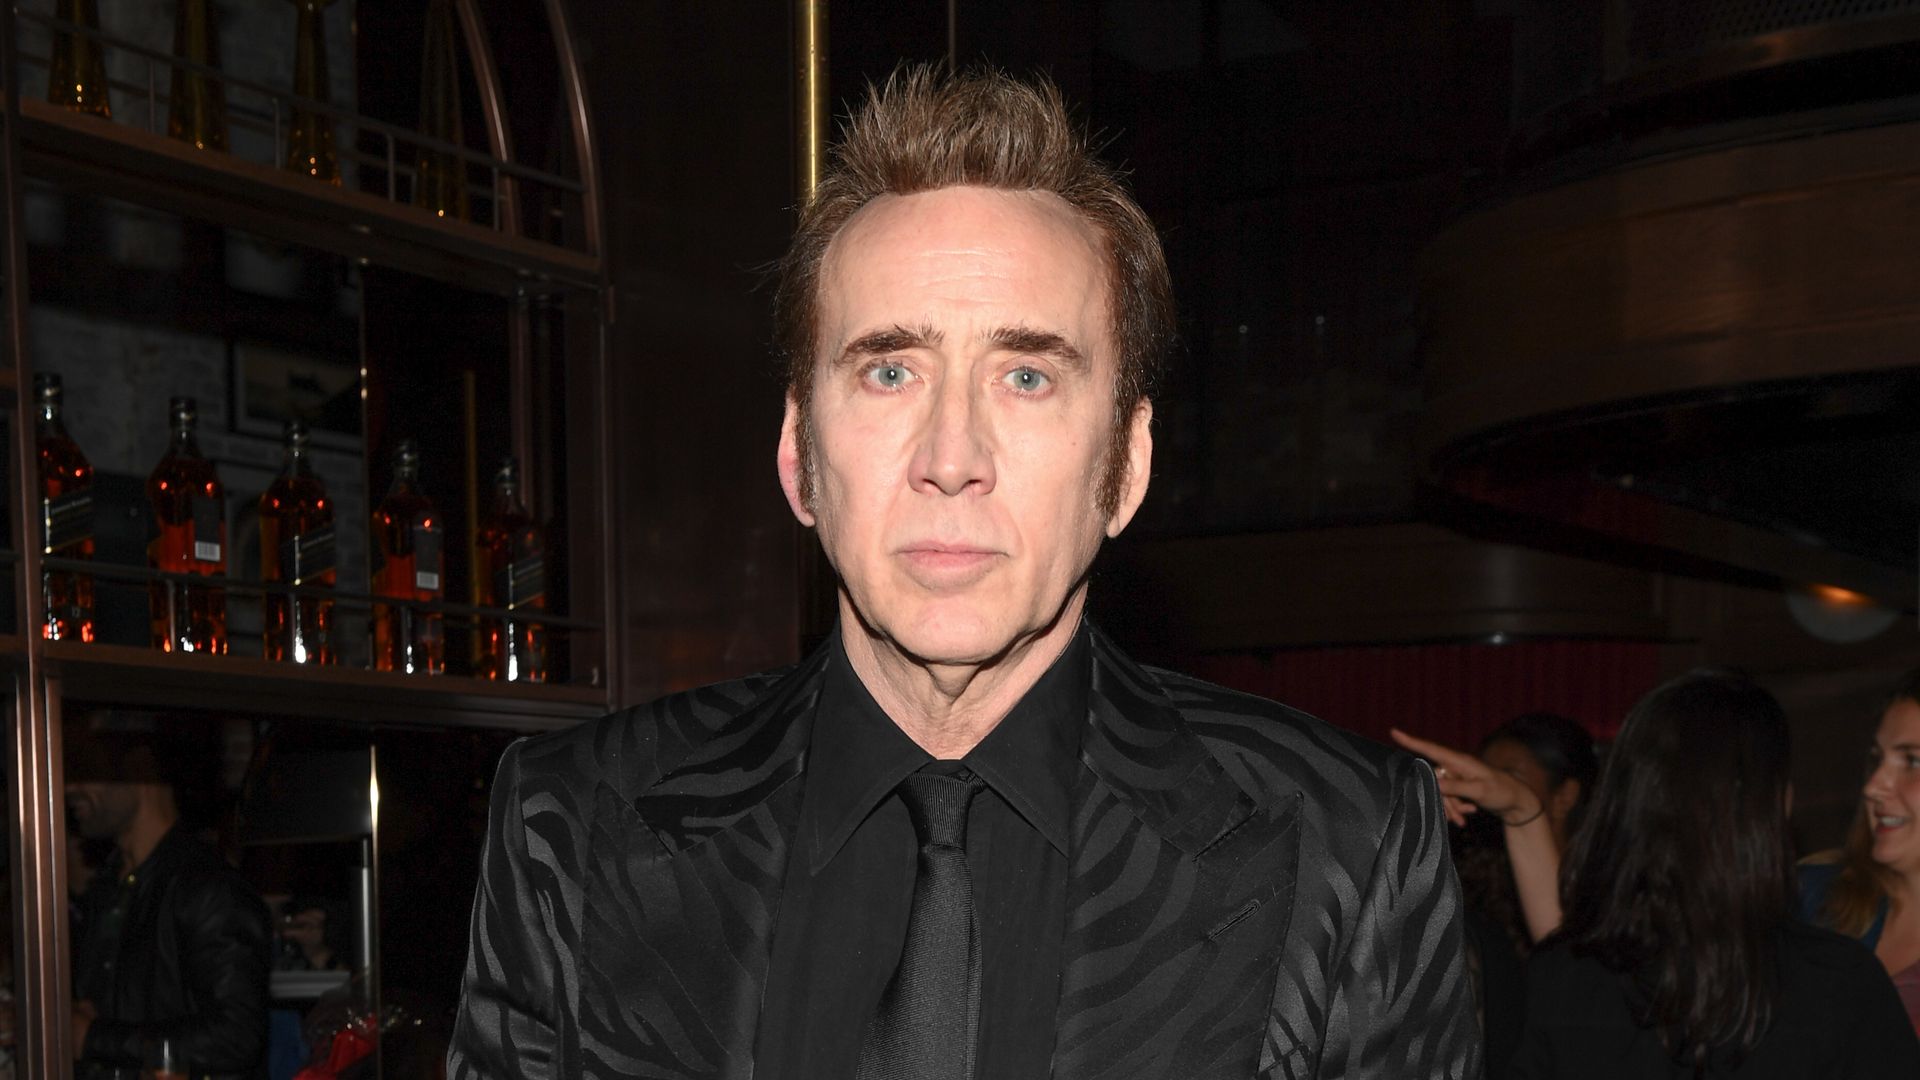 Nicolas Cage attends the "Dream Scenario" world premiere party hosted by Ketel One Vodka at Pink Sky during the 2023 Toronto International Film Festival